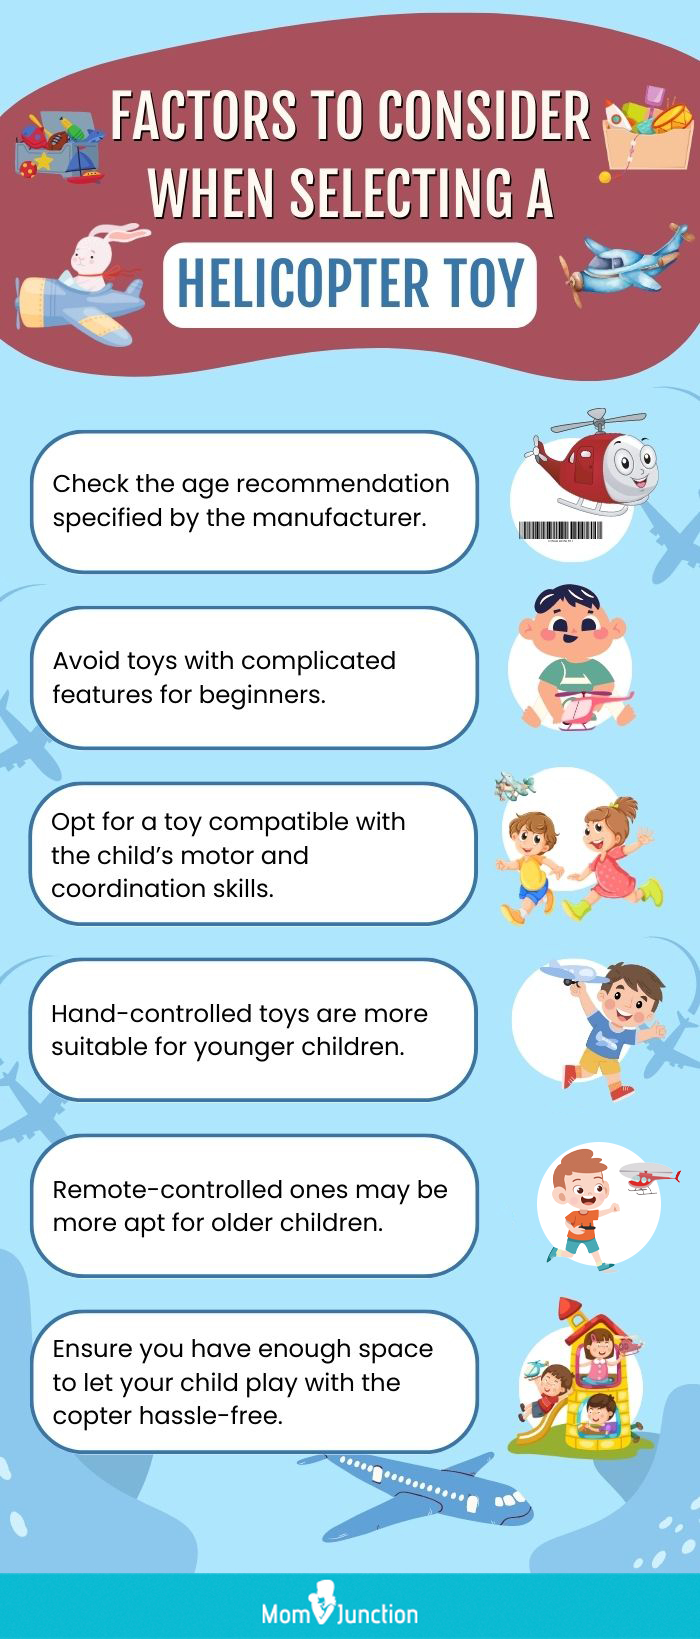 Factors To Consider When Selecting A Helicopter Toy (infographic)